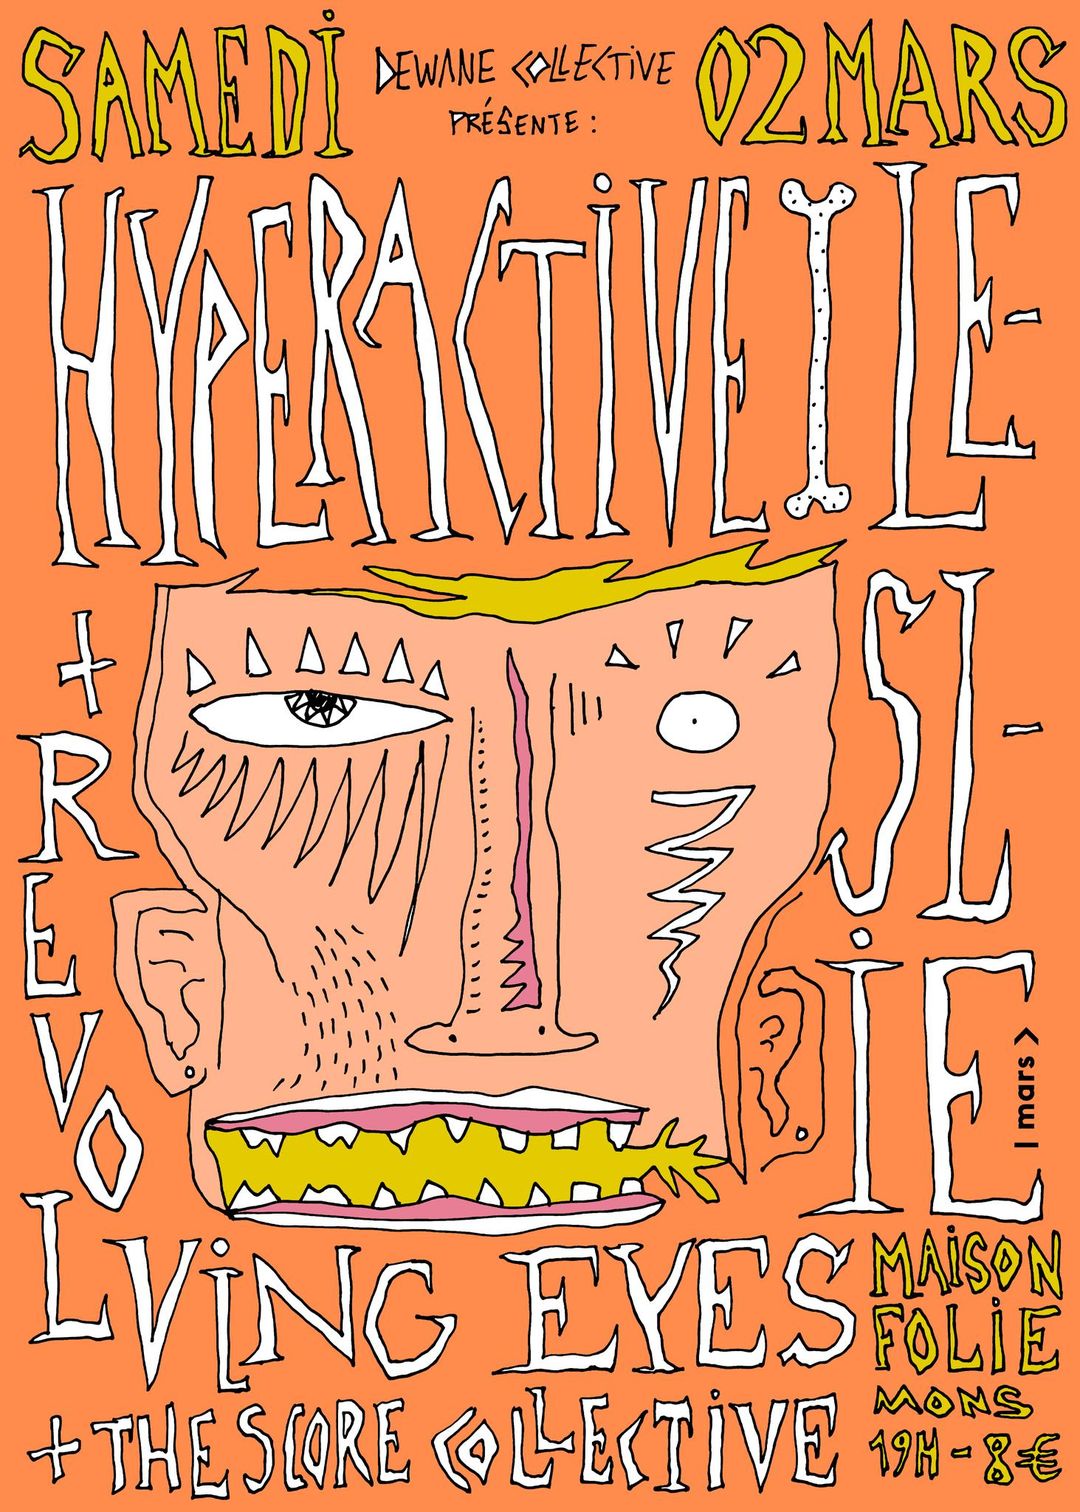 HYPERACTIVE LESLIE (FR) + THE REVOLVING EYES (ROB° + THE SCORE COLLECTIVE